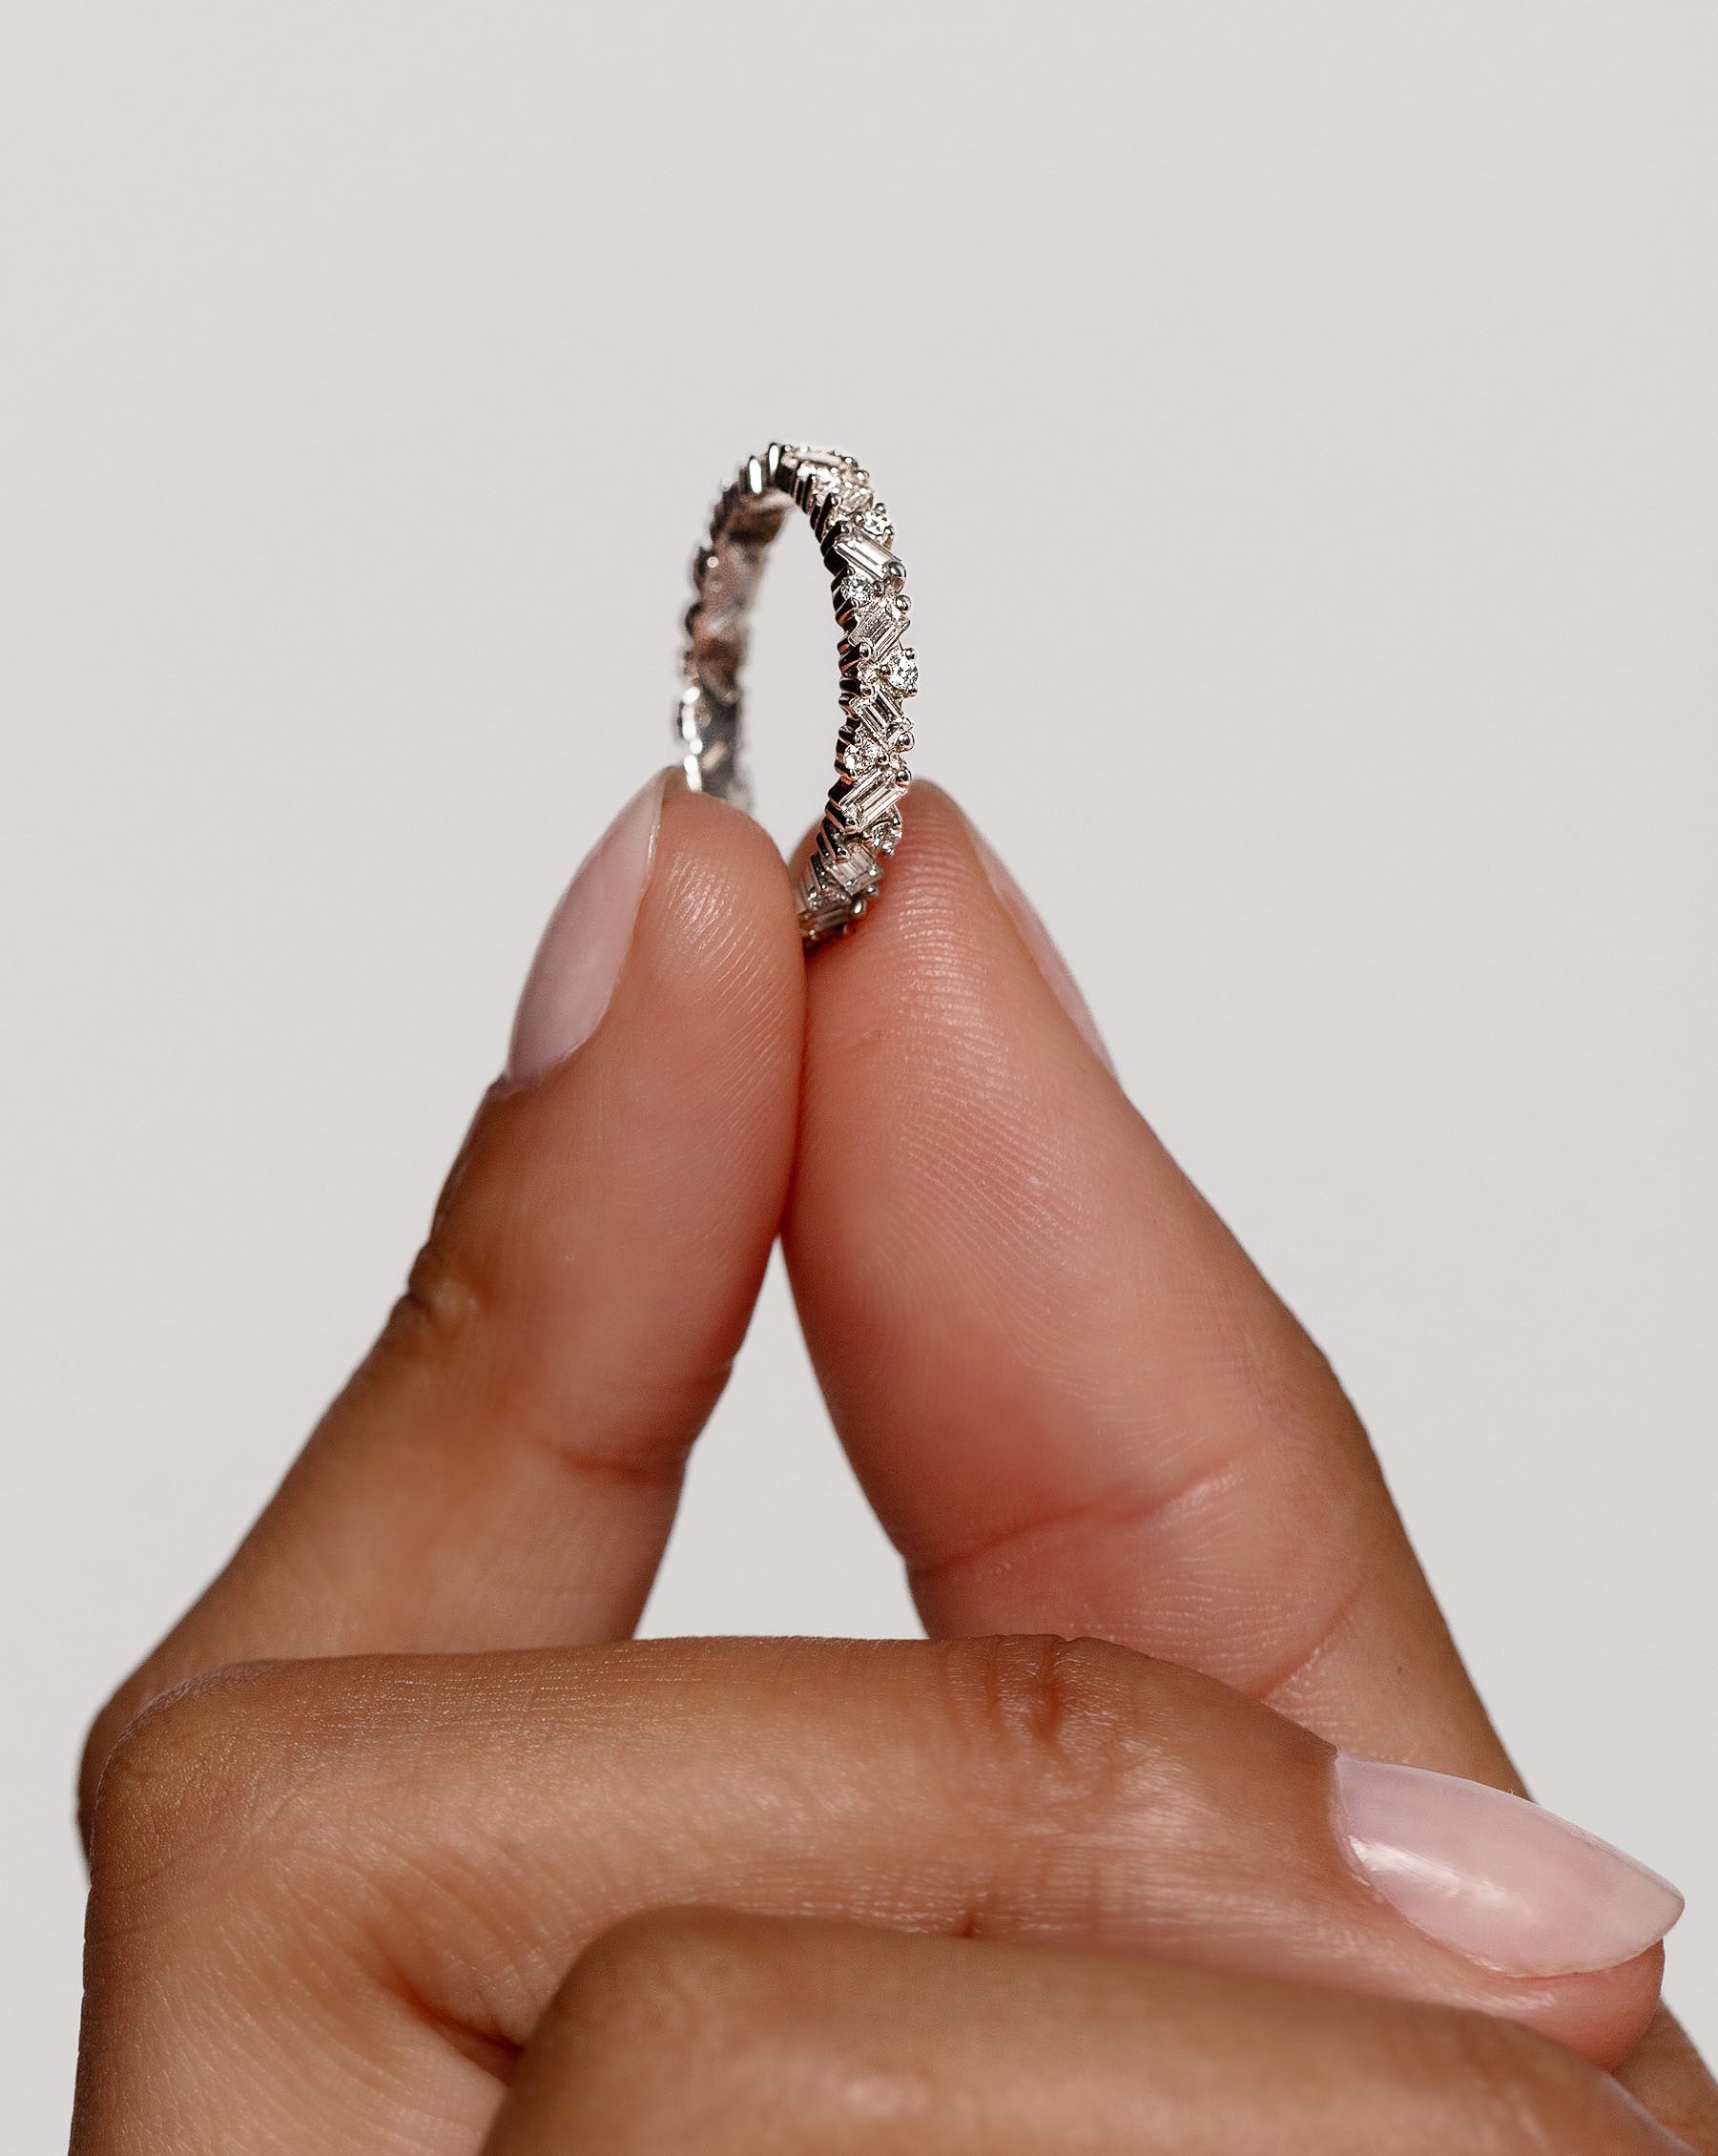 How to Build the Ultimate Wedding Ring Stack